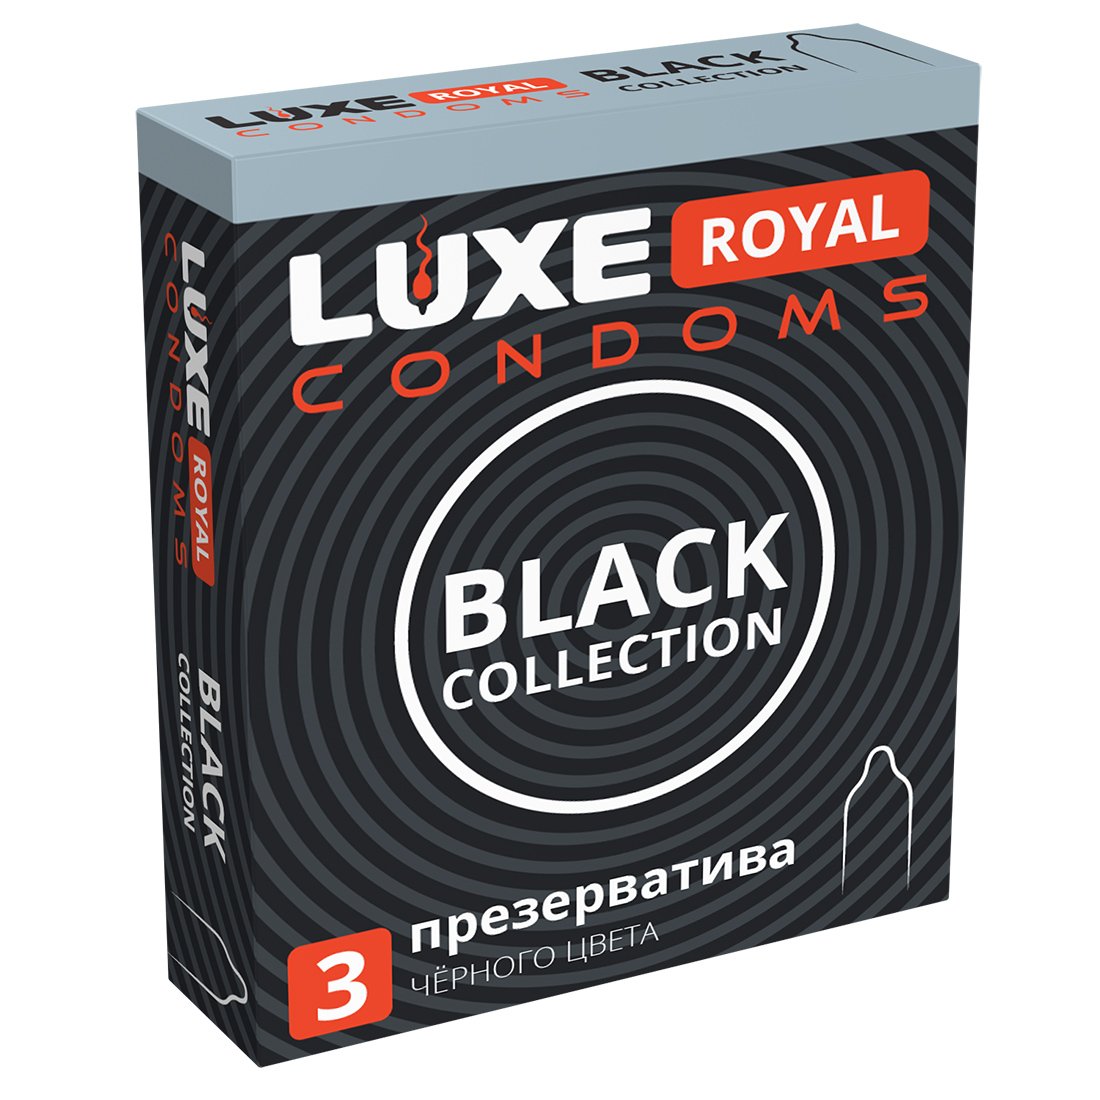  LUXE ROYAL BLACK COLLECTION 3 